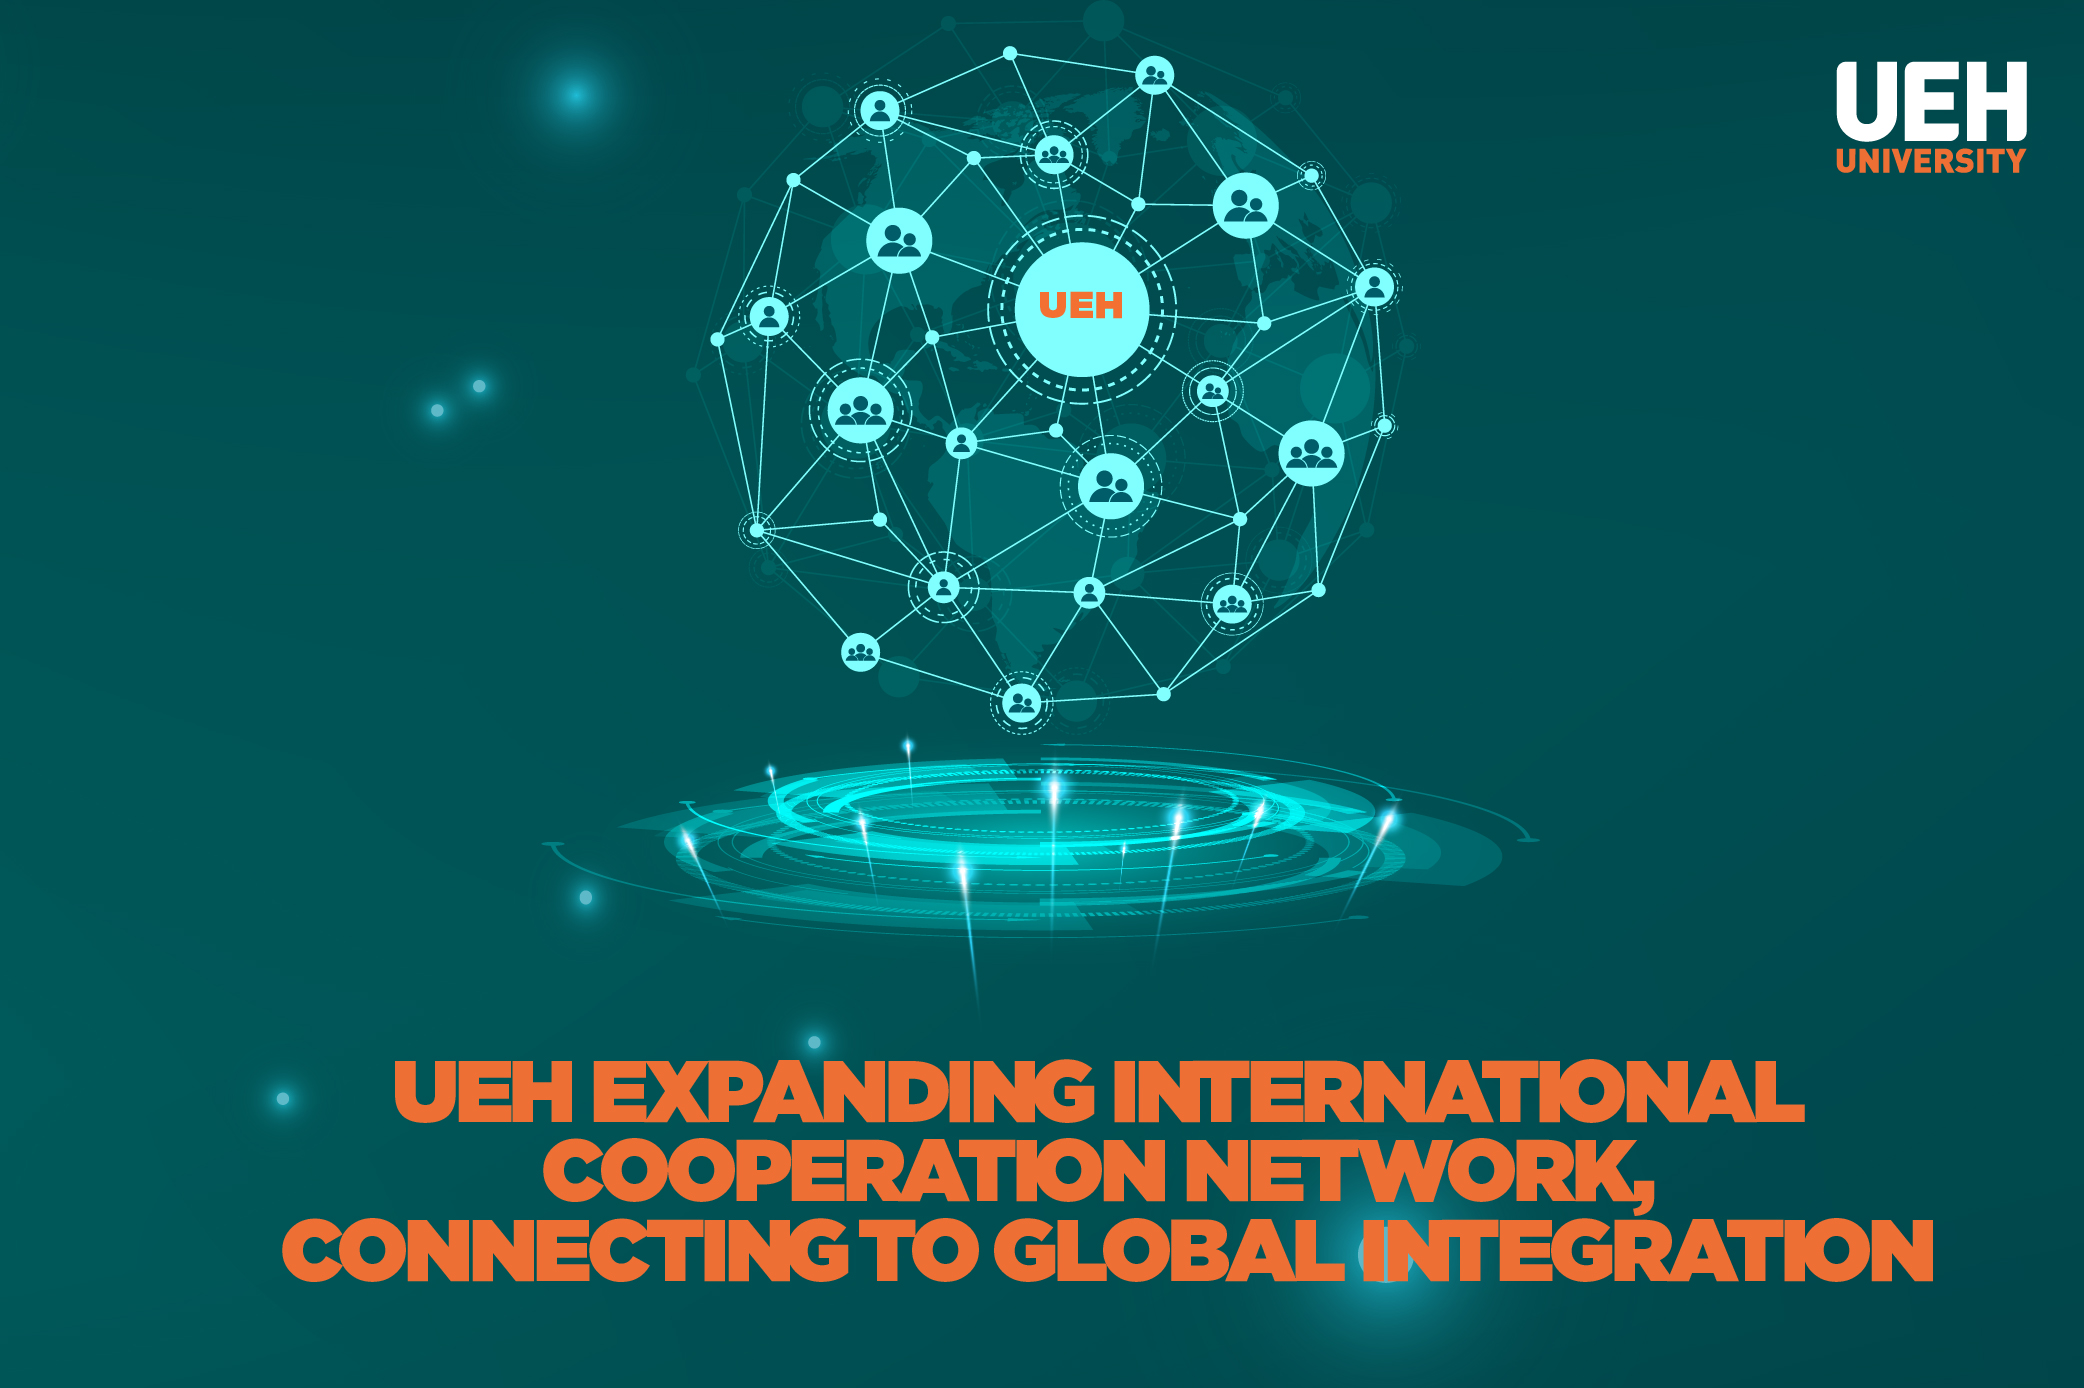 UEH expanding the international cooperation network connecting to global integration